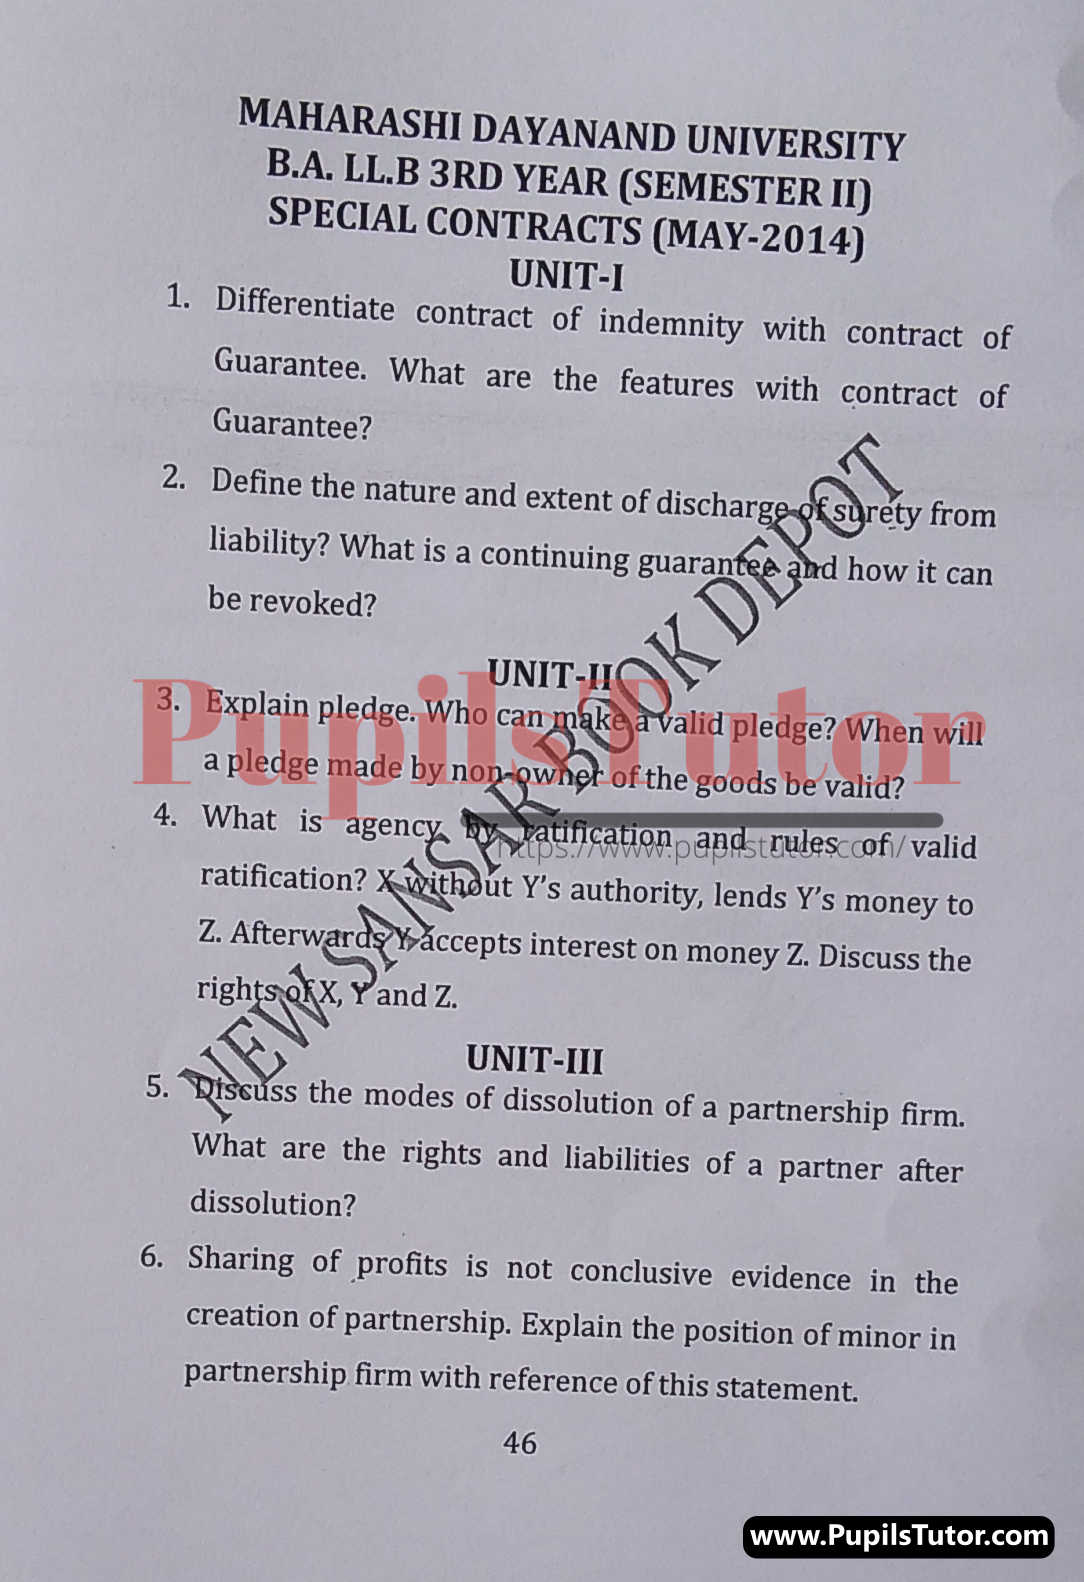 MDU (Maharshi Dayanand University, Rohtak Haryana) LLB Regular Exam (Hons.) Second Semester Previous Year Special Contracts Question Paper For May, 2014 Exam (Question Paper Page 1) - pupilstutor.com